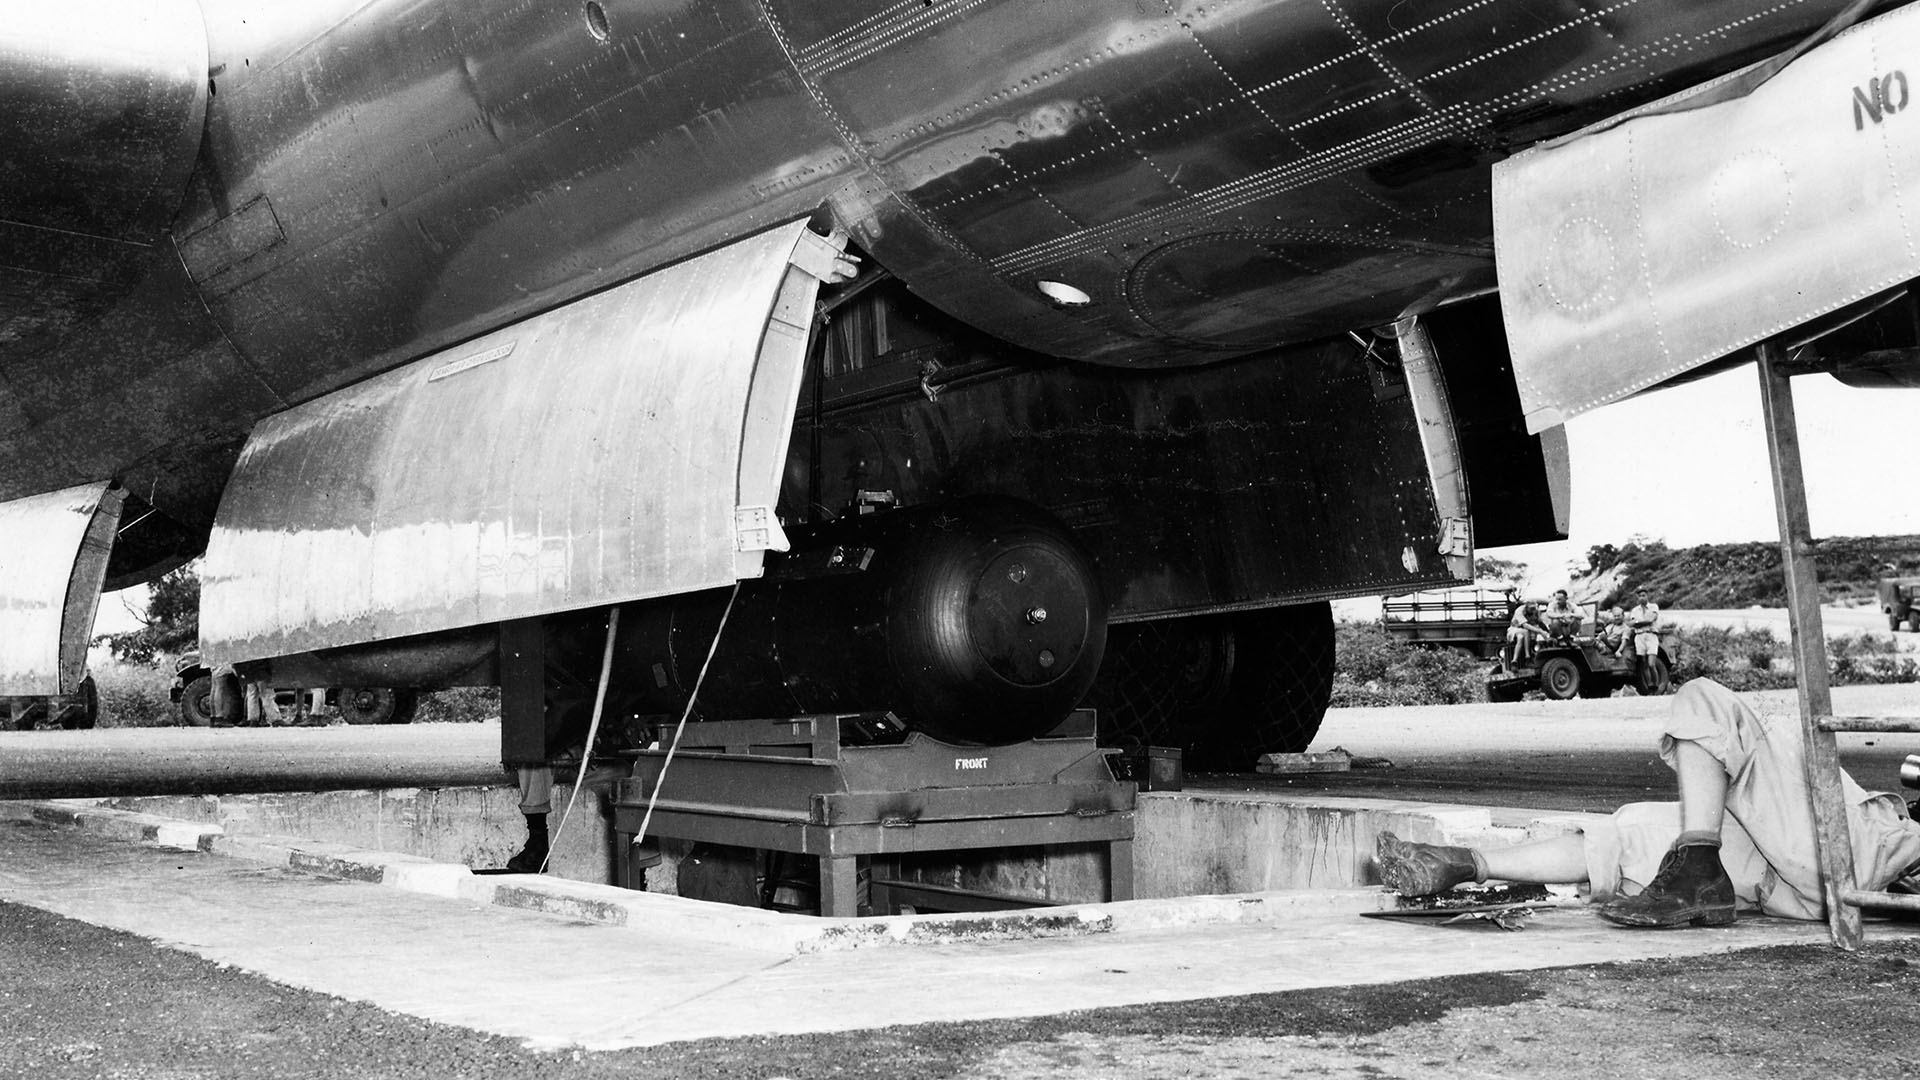 The atomic bomb, codenamed 'Little Boy', as it is hoisted into the bomb bay of the Enola Gay.